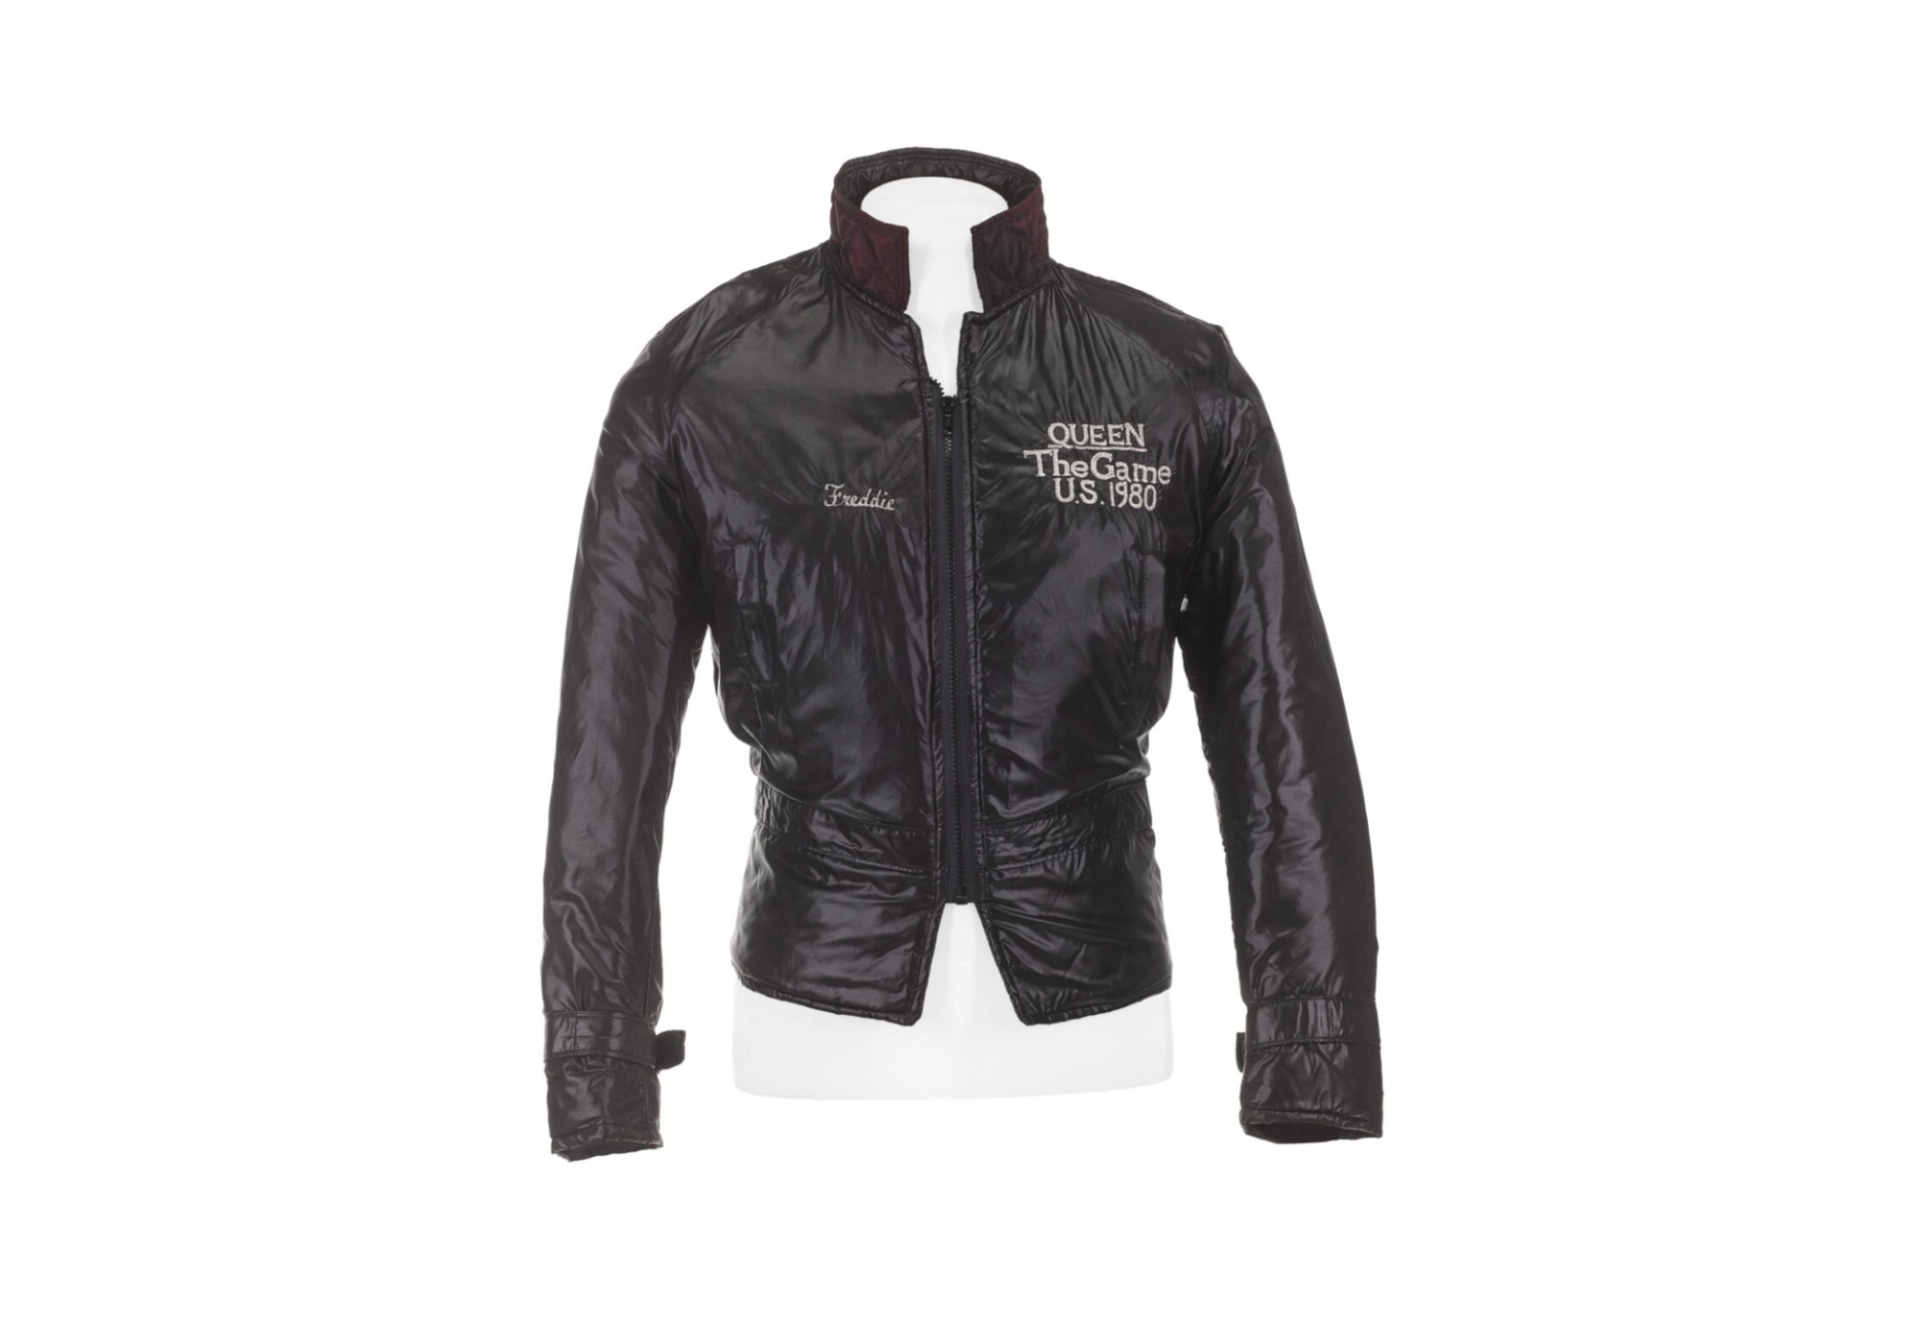 An image of Freddie Mercury's black personalised U.S. Tour Jacket for The Game tour